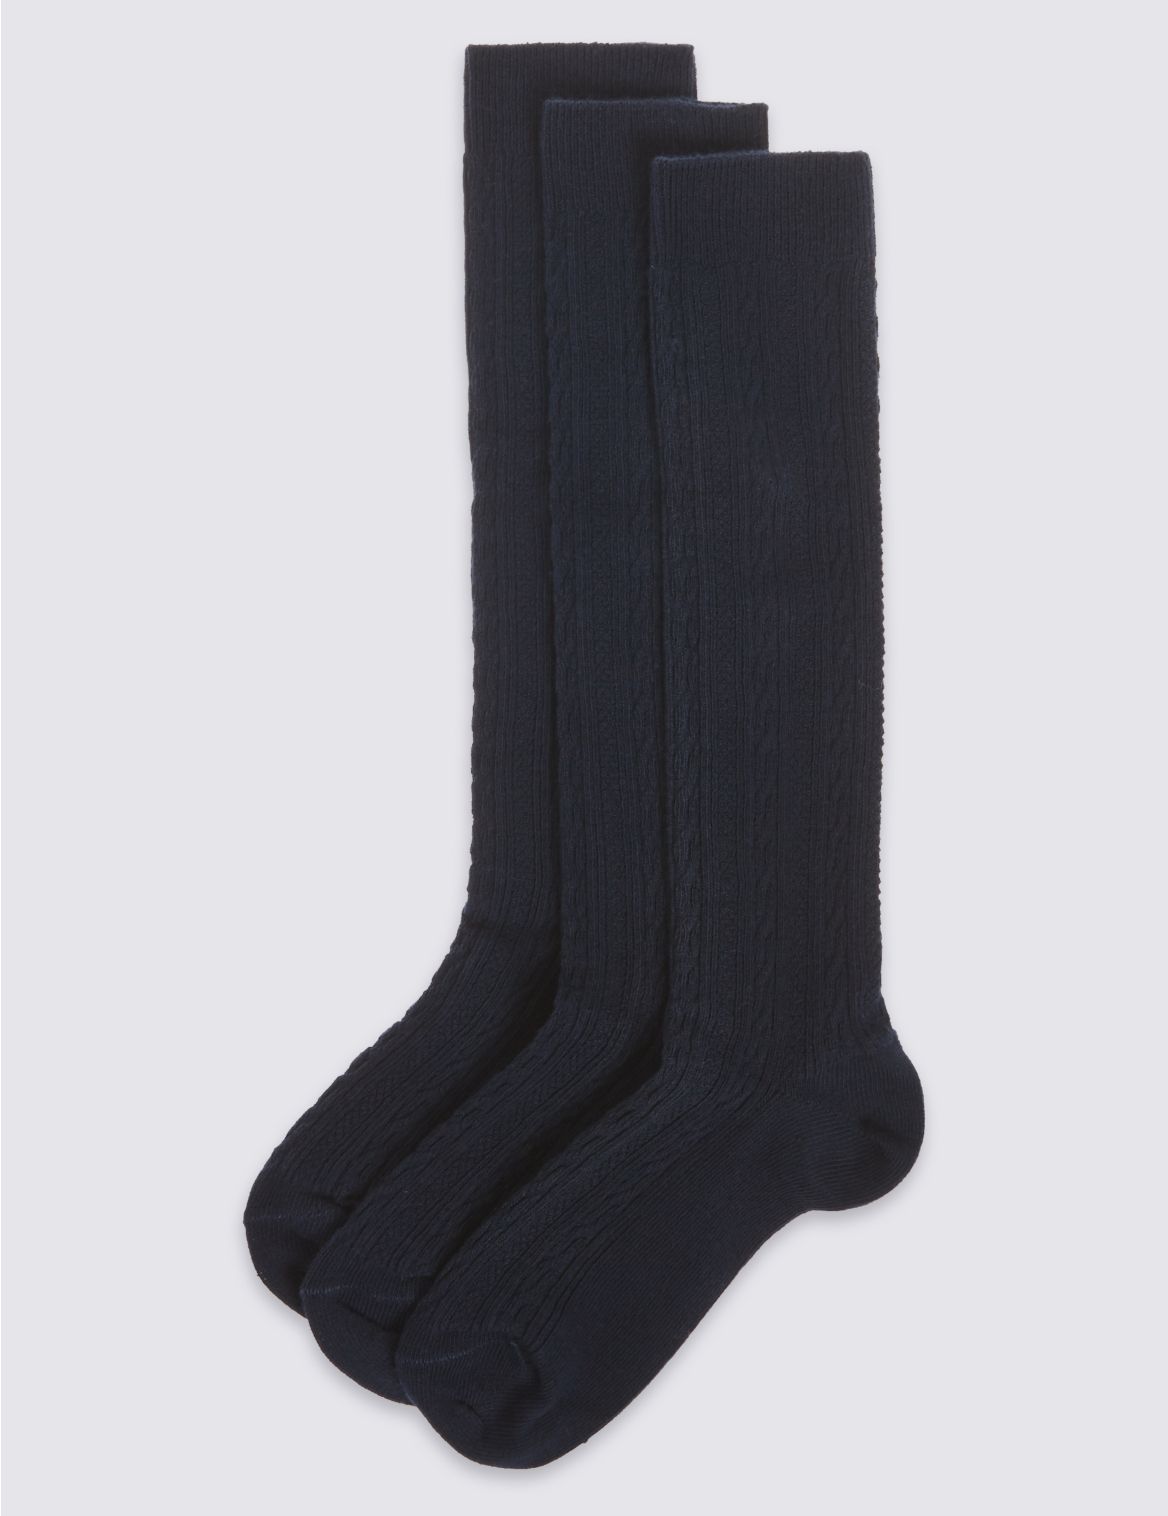 3pk of Cable Knee High Socks navy